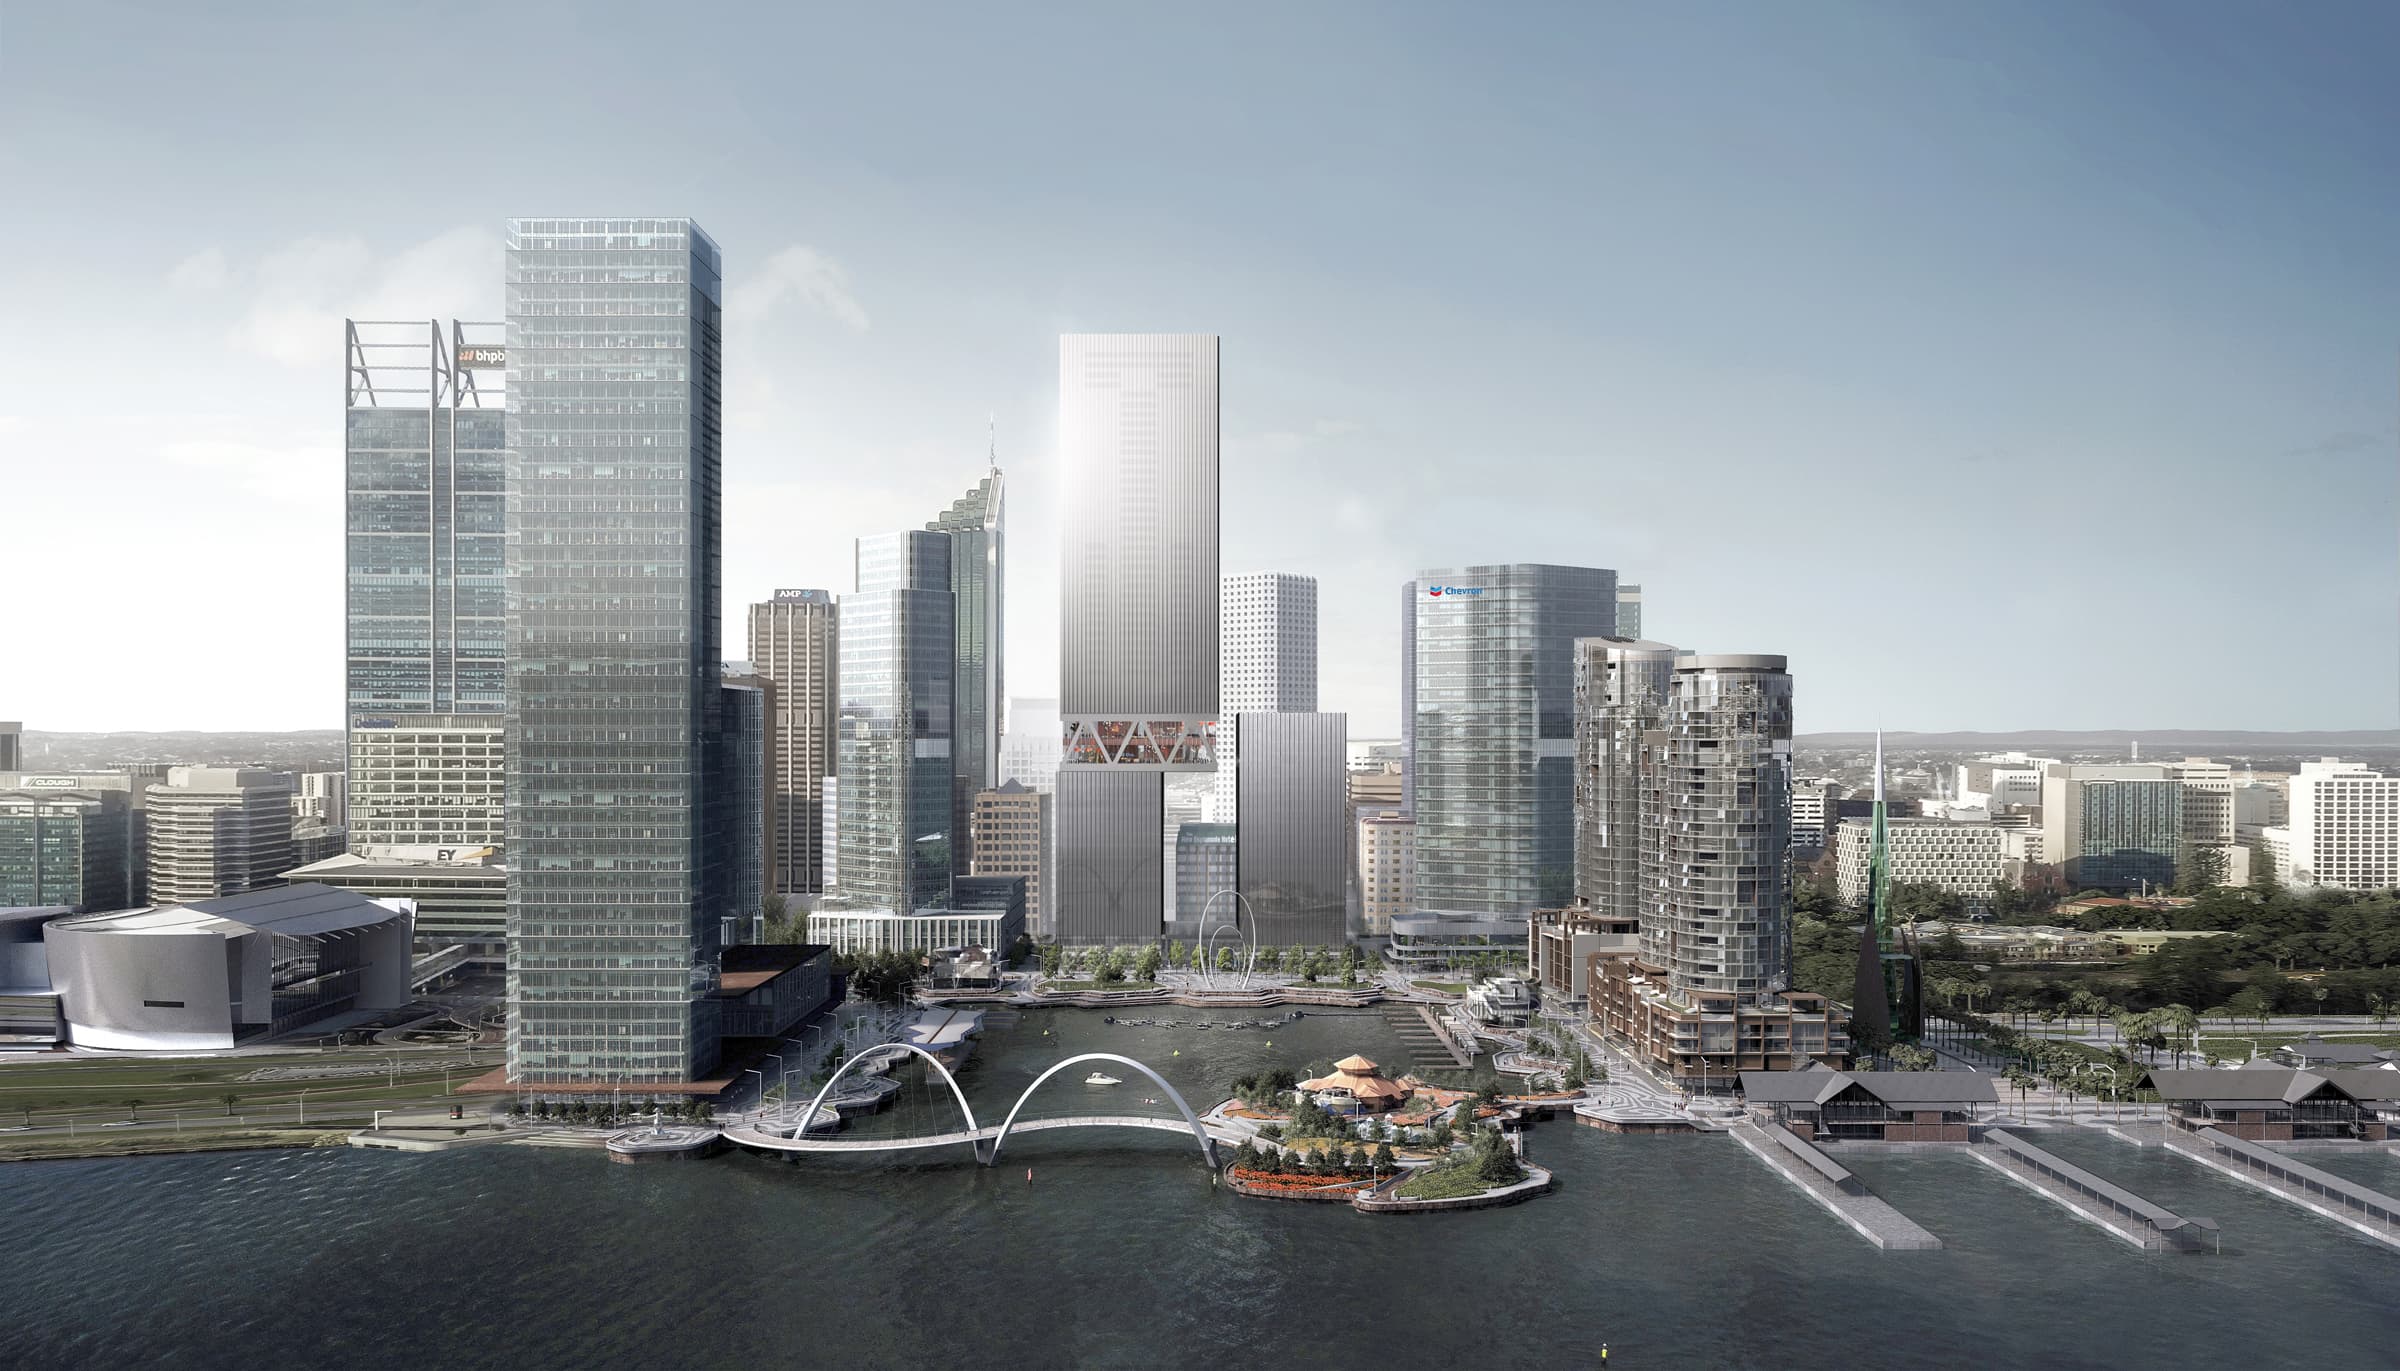 Visualization of Elizabeth Quay 5 & 6 mixed-use towers 2.0, designed by REX.